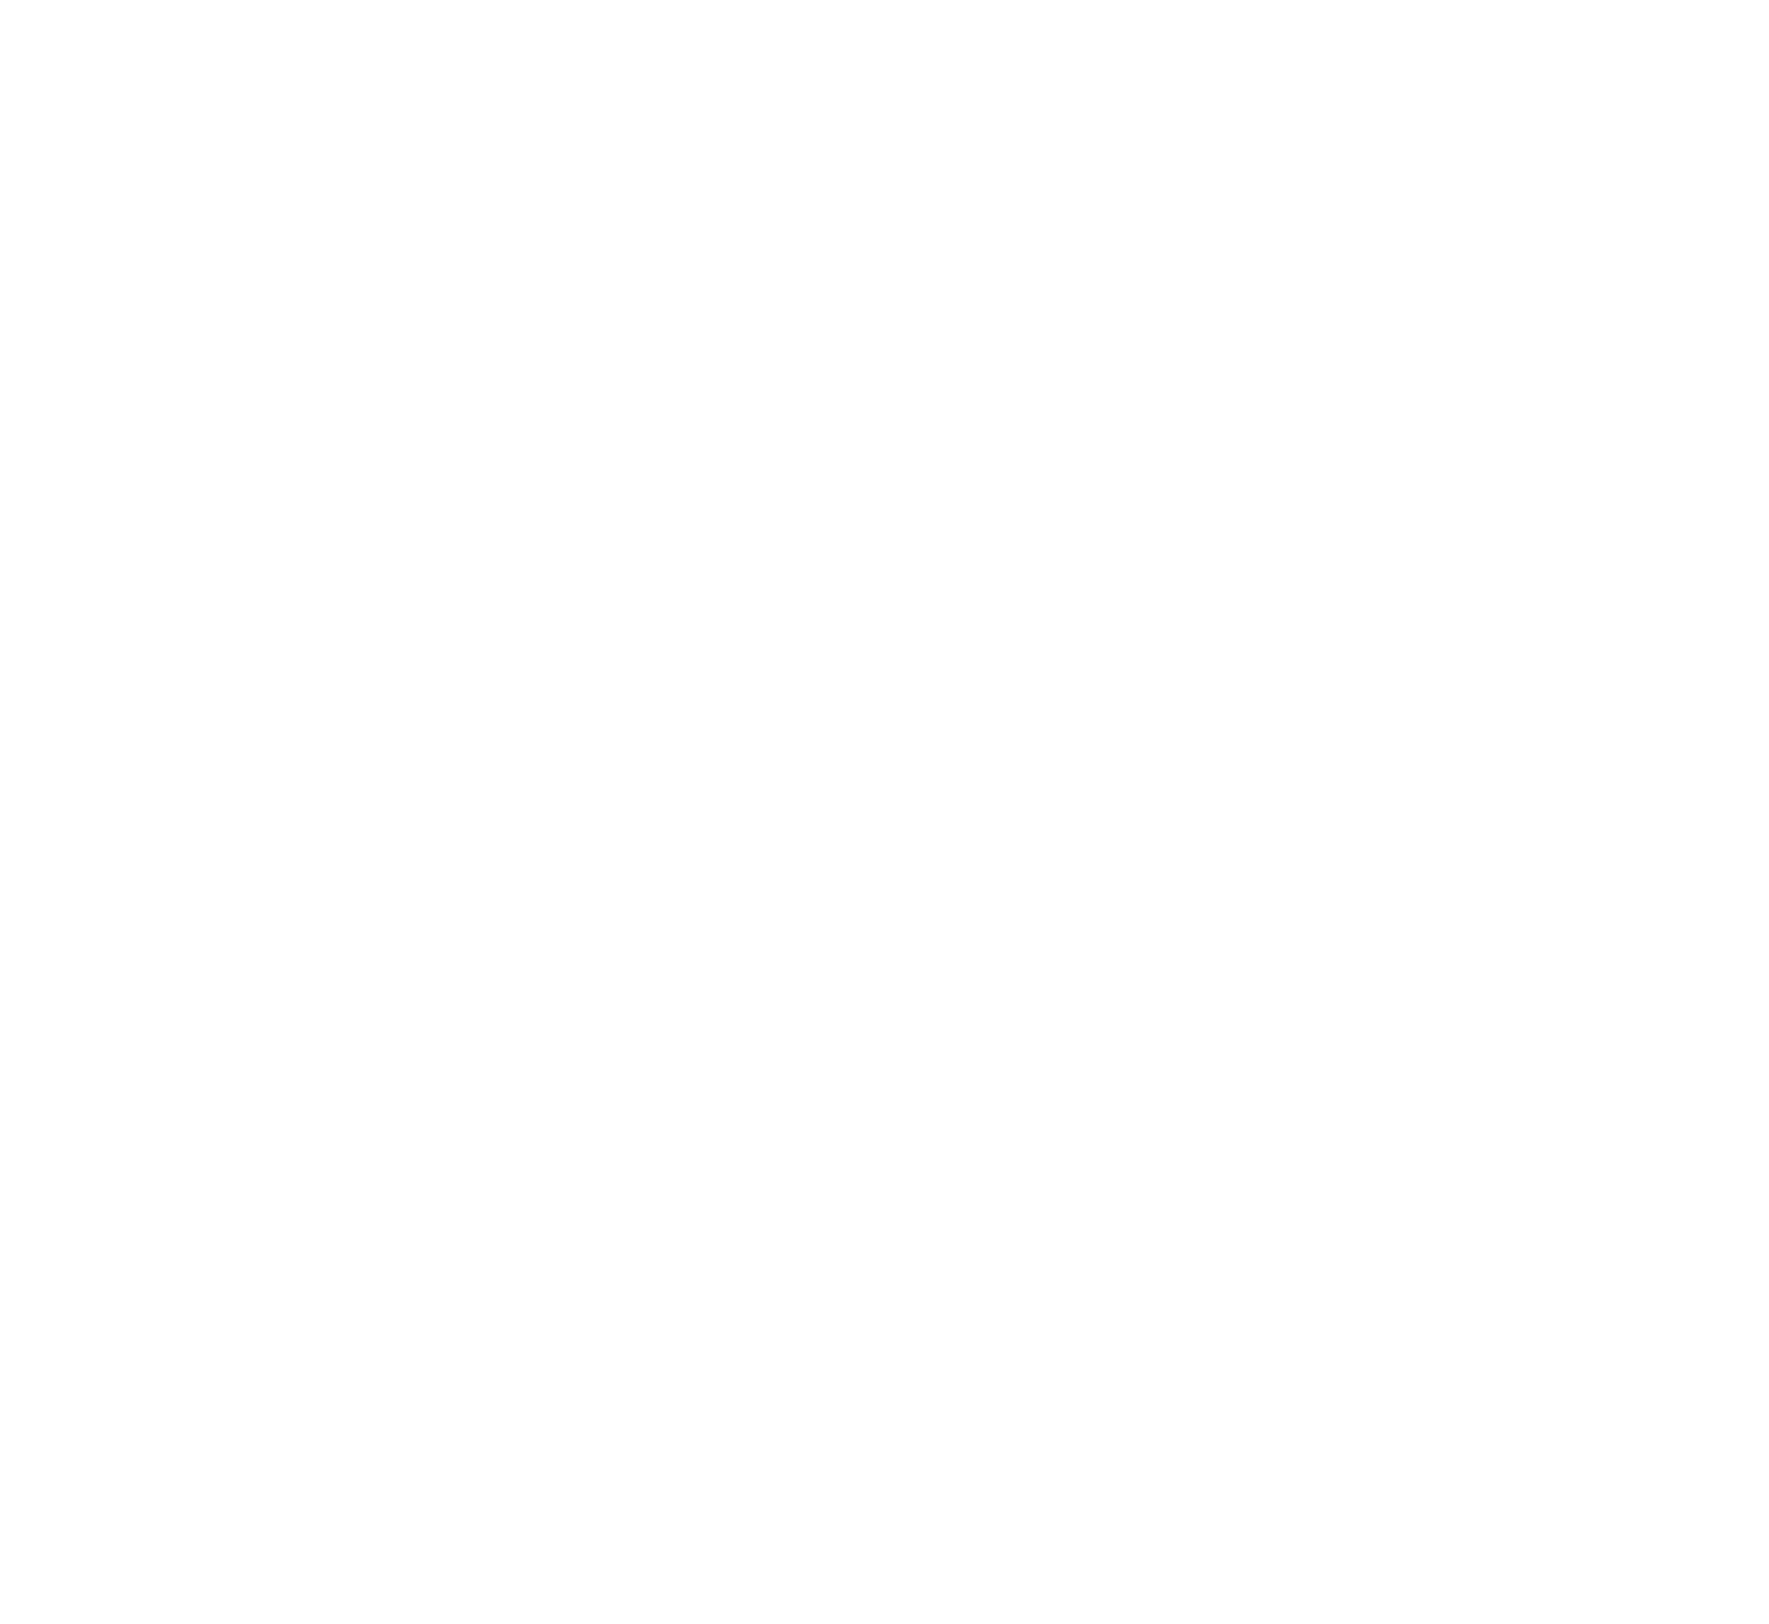 Club de Madrid, democracy that delivers, Presidents, Prime Ministers